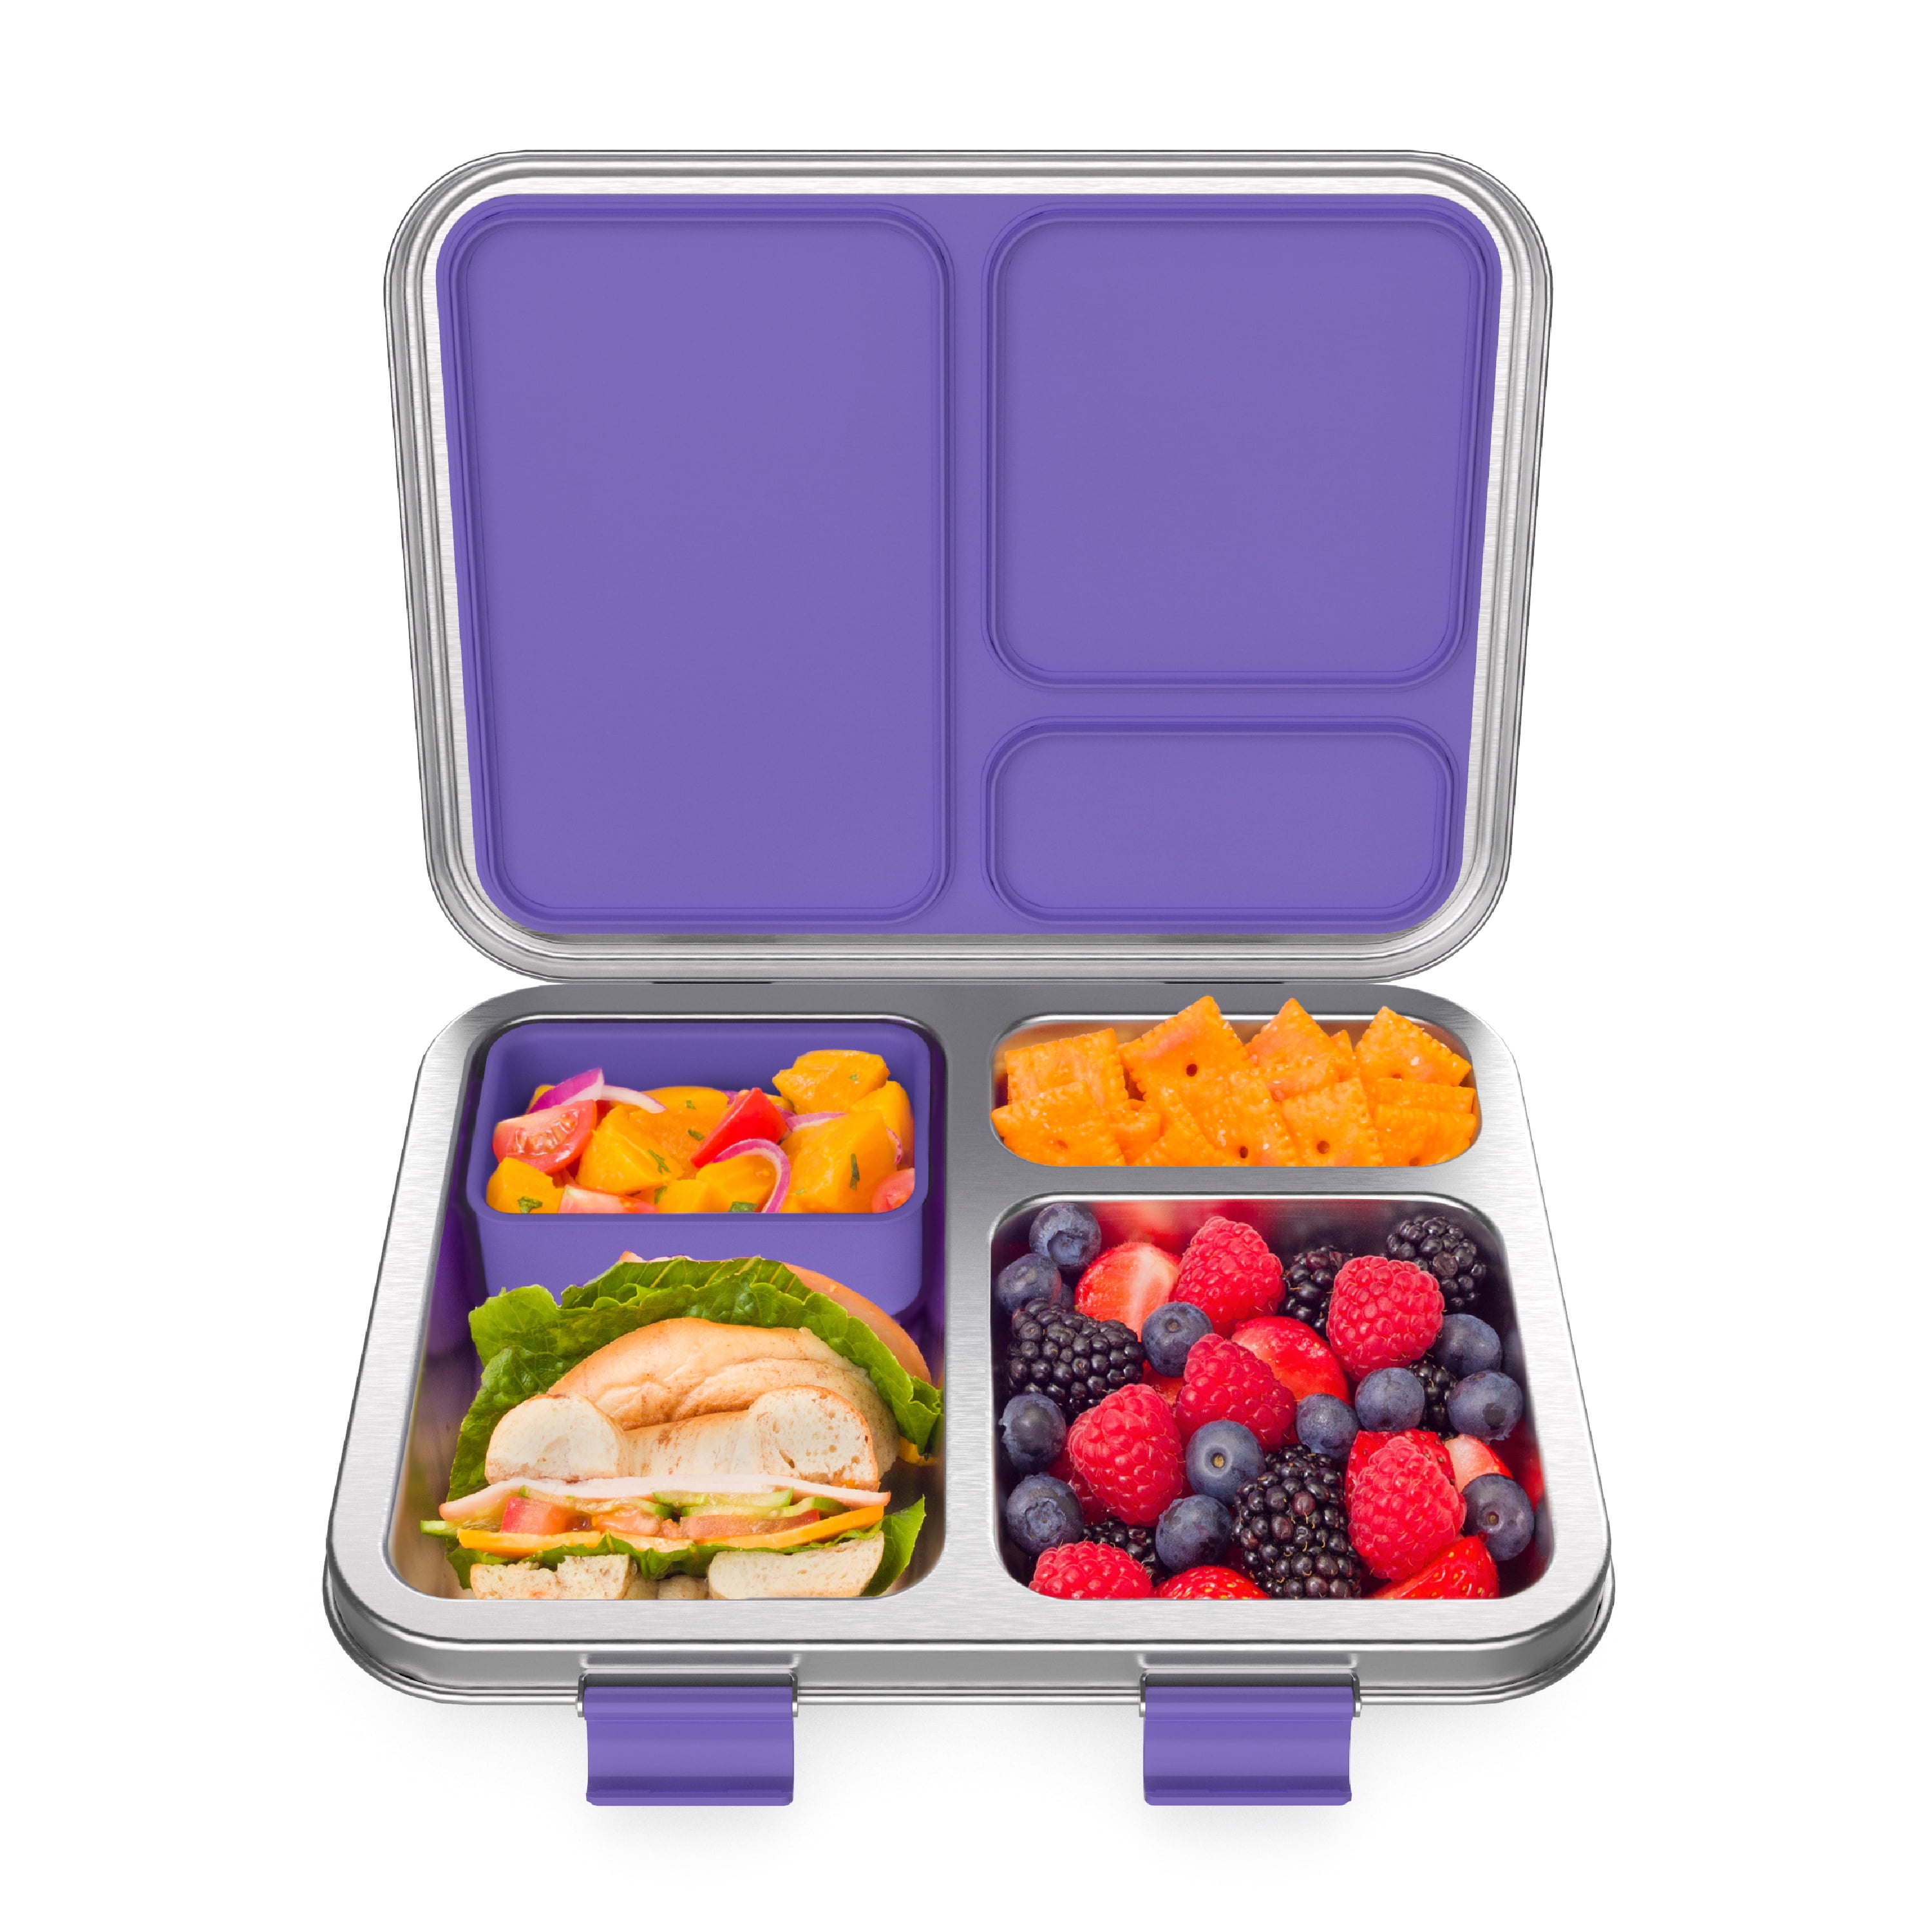  Pawtong Kids Leak-proof Bento Lunch Box with Removable Tritan  Tray, Prints Lunch Food Containers with 4 Compartment, BPA-Free, Dishwasher  Safe, Food-Safe Materials (Blue): Home & Kitchen